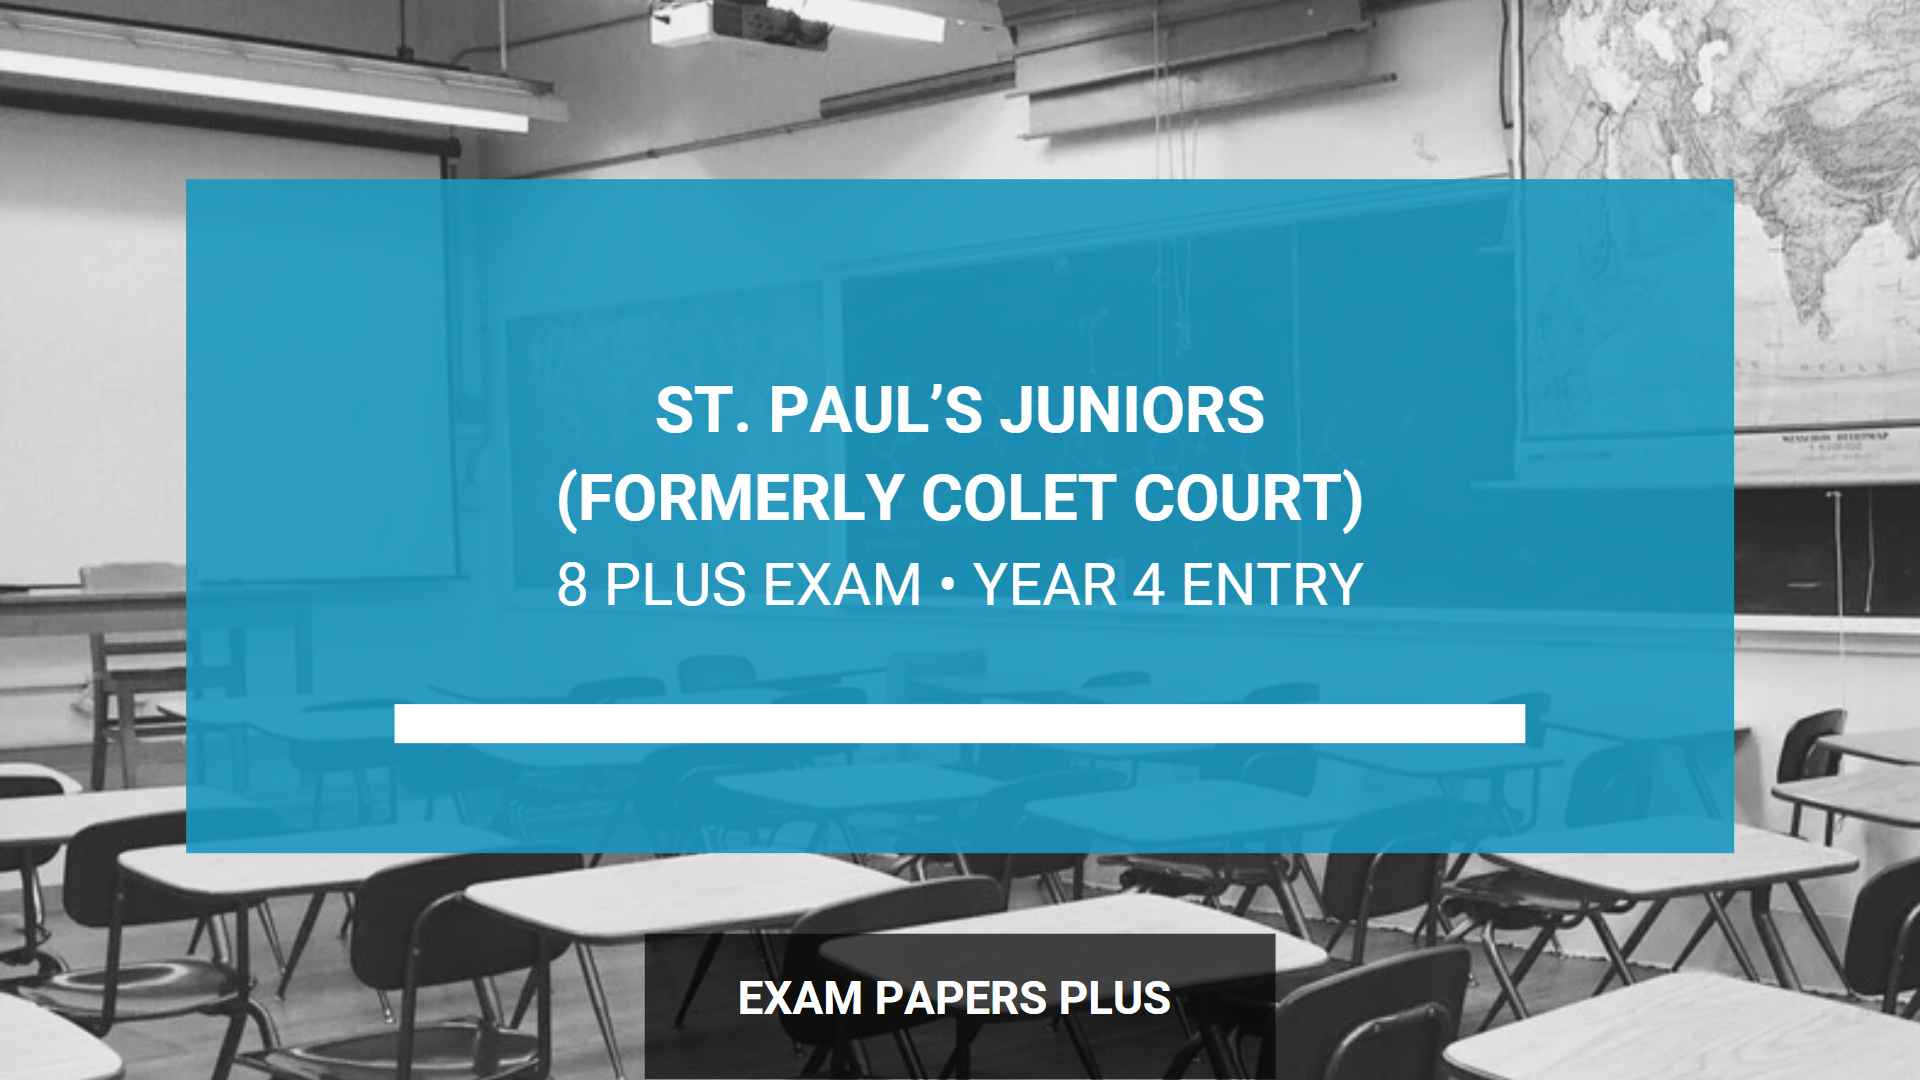 https://exampapersplus.co.uk/wp-content/uploads/2016/11/St.-Pauls-Juniors-formerly-Colet-Court-8-Plus-entry.jpg